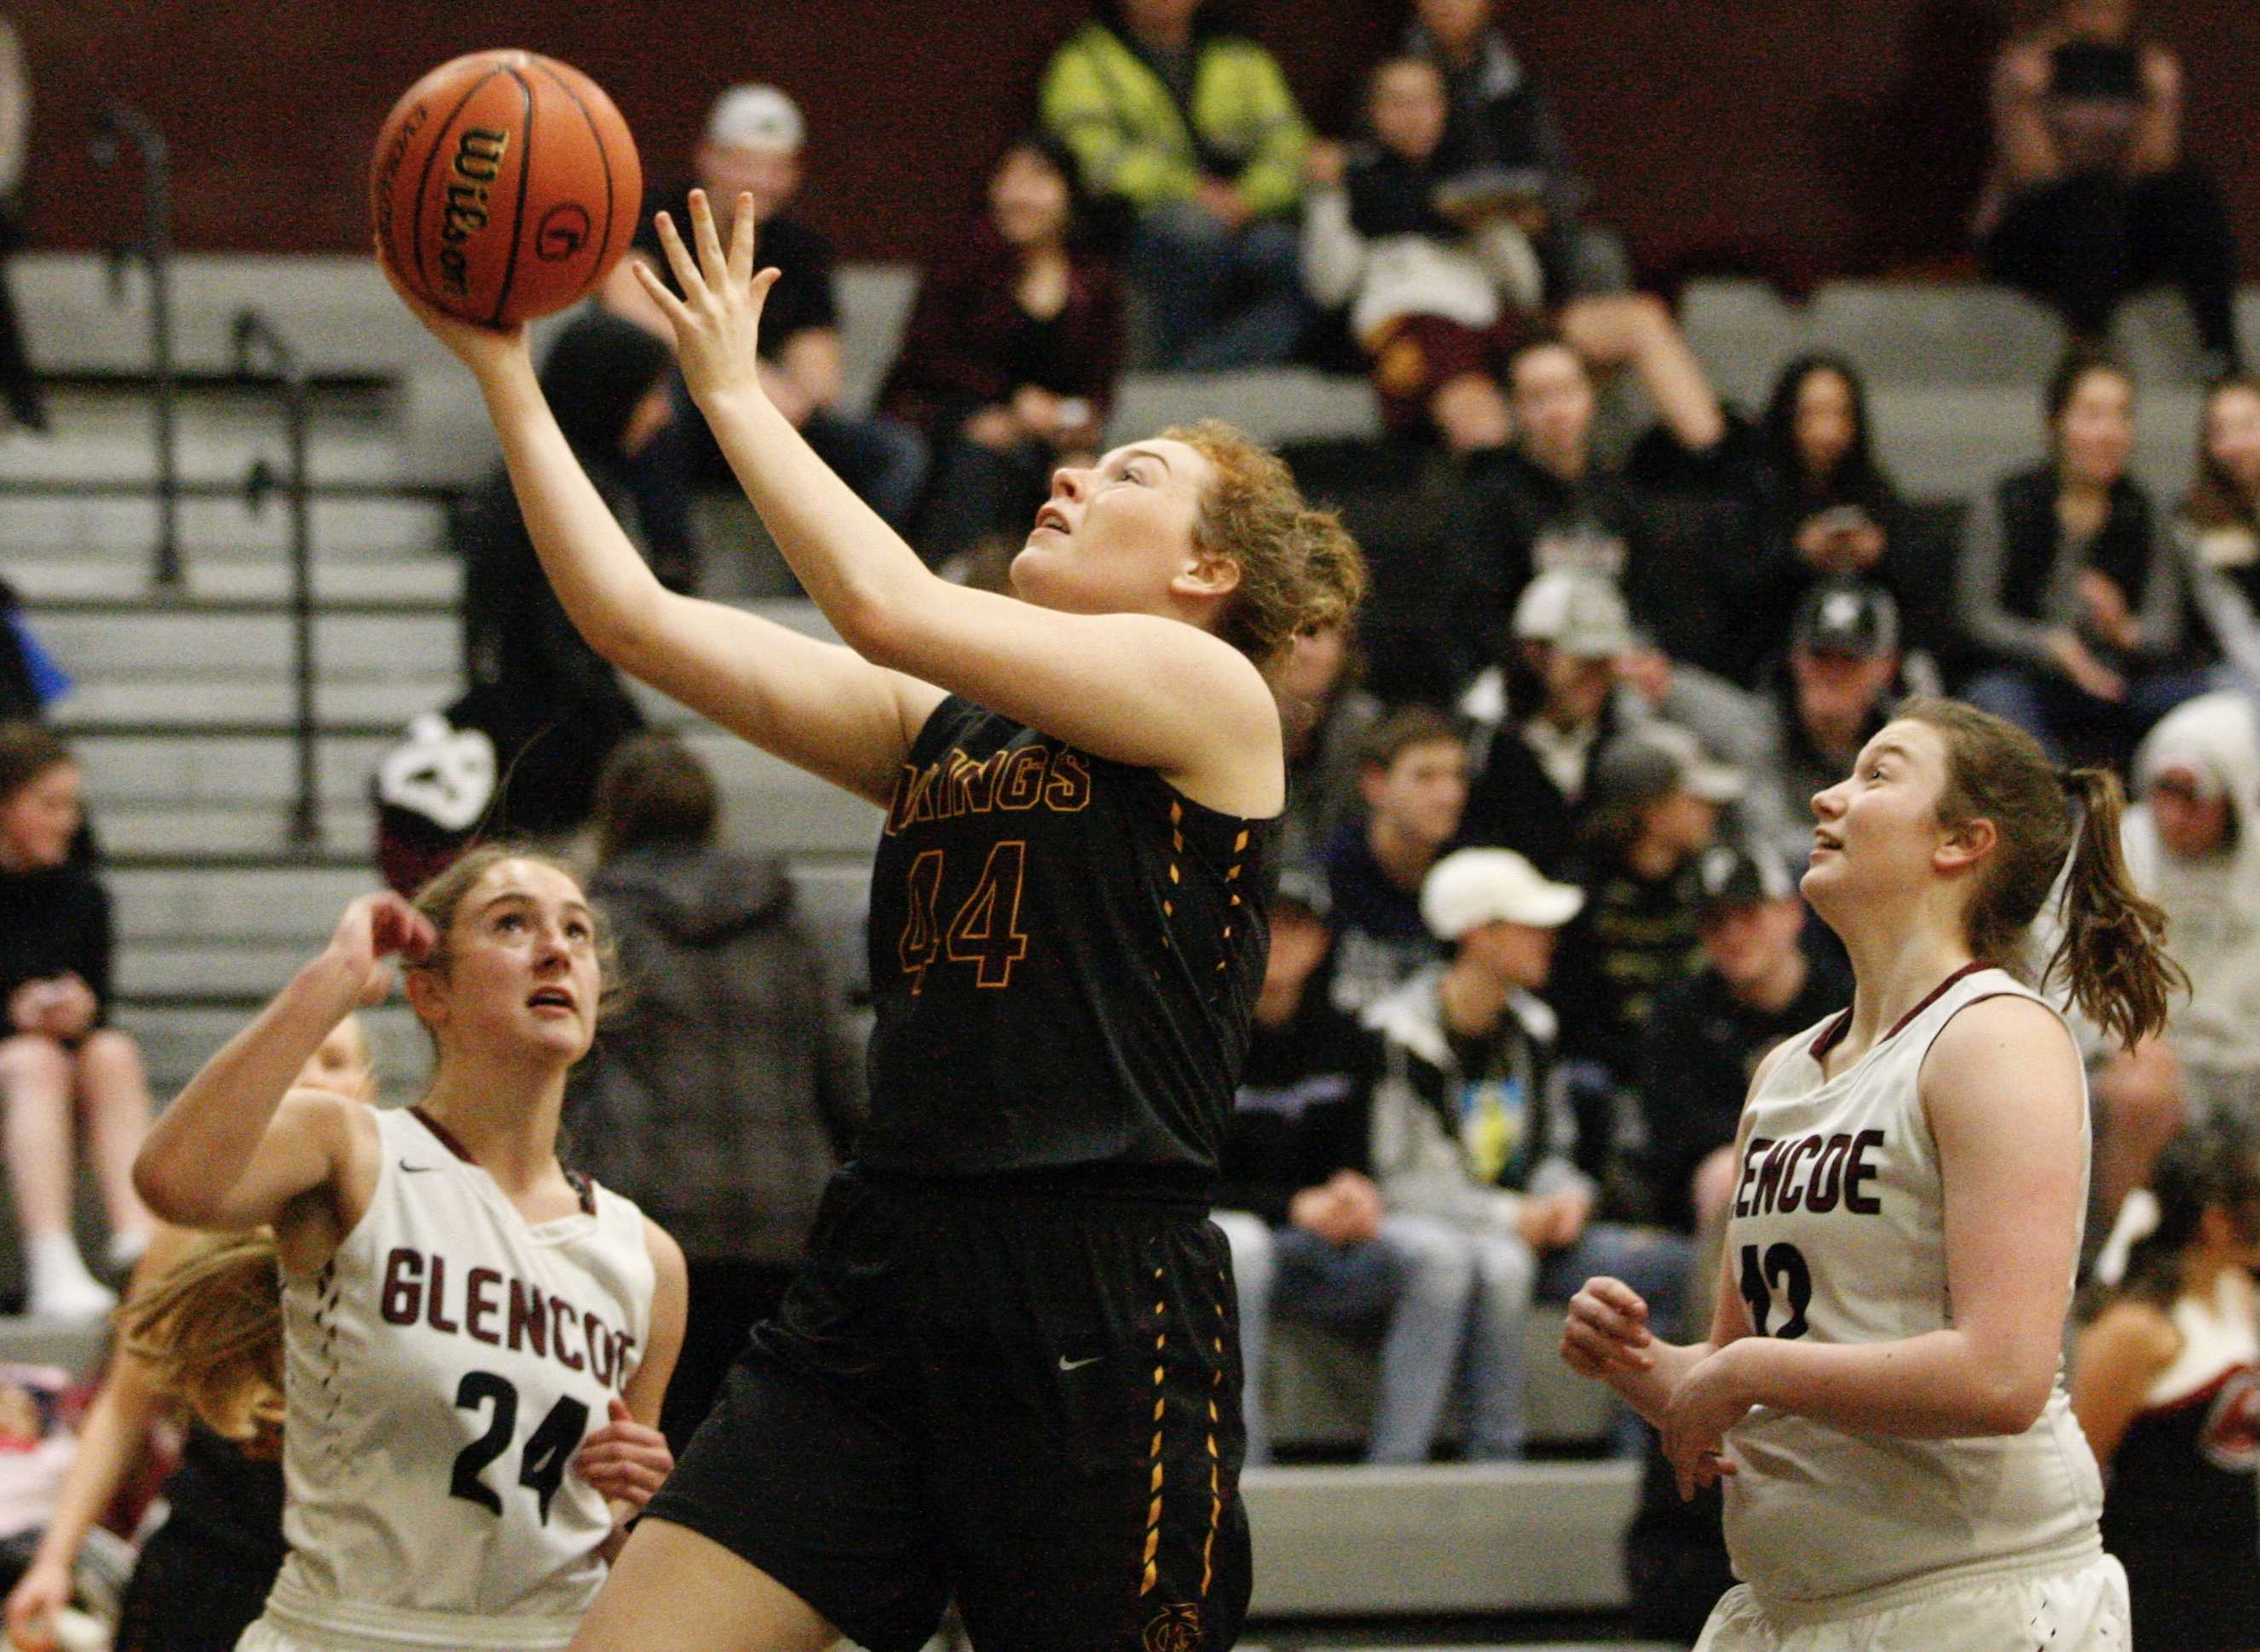 Forest Grove's Olivia Grosse gets between Breauna Van Dyke and Briana Ball of Glencoe for two of her nine points.